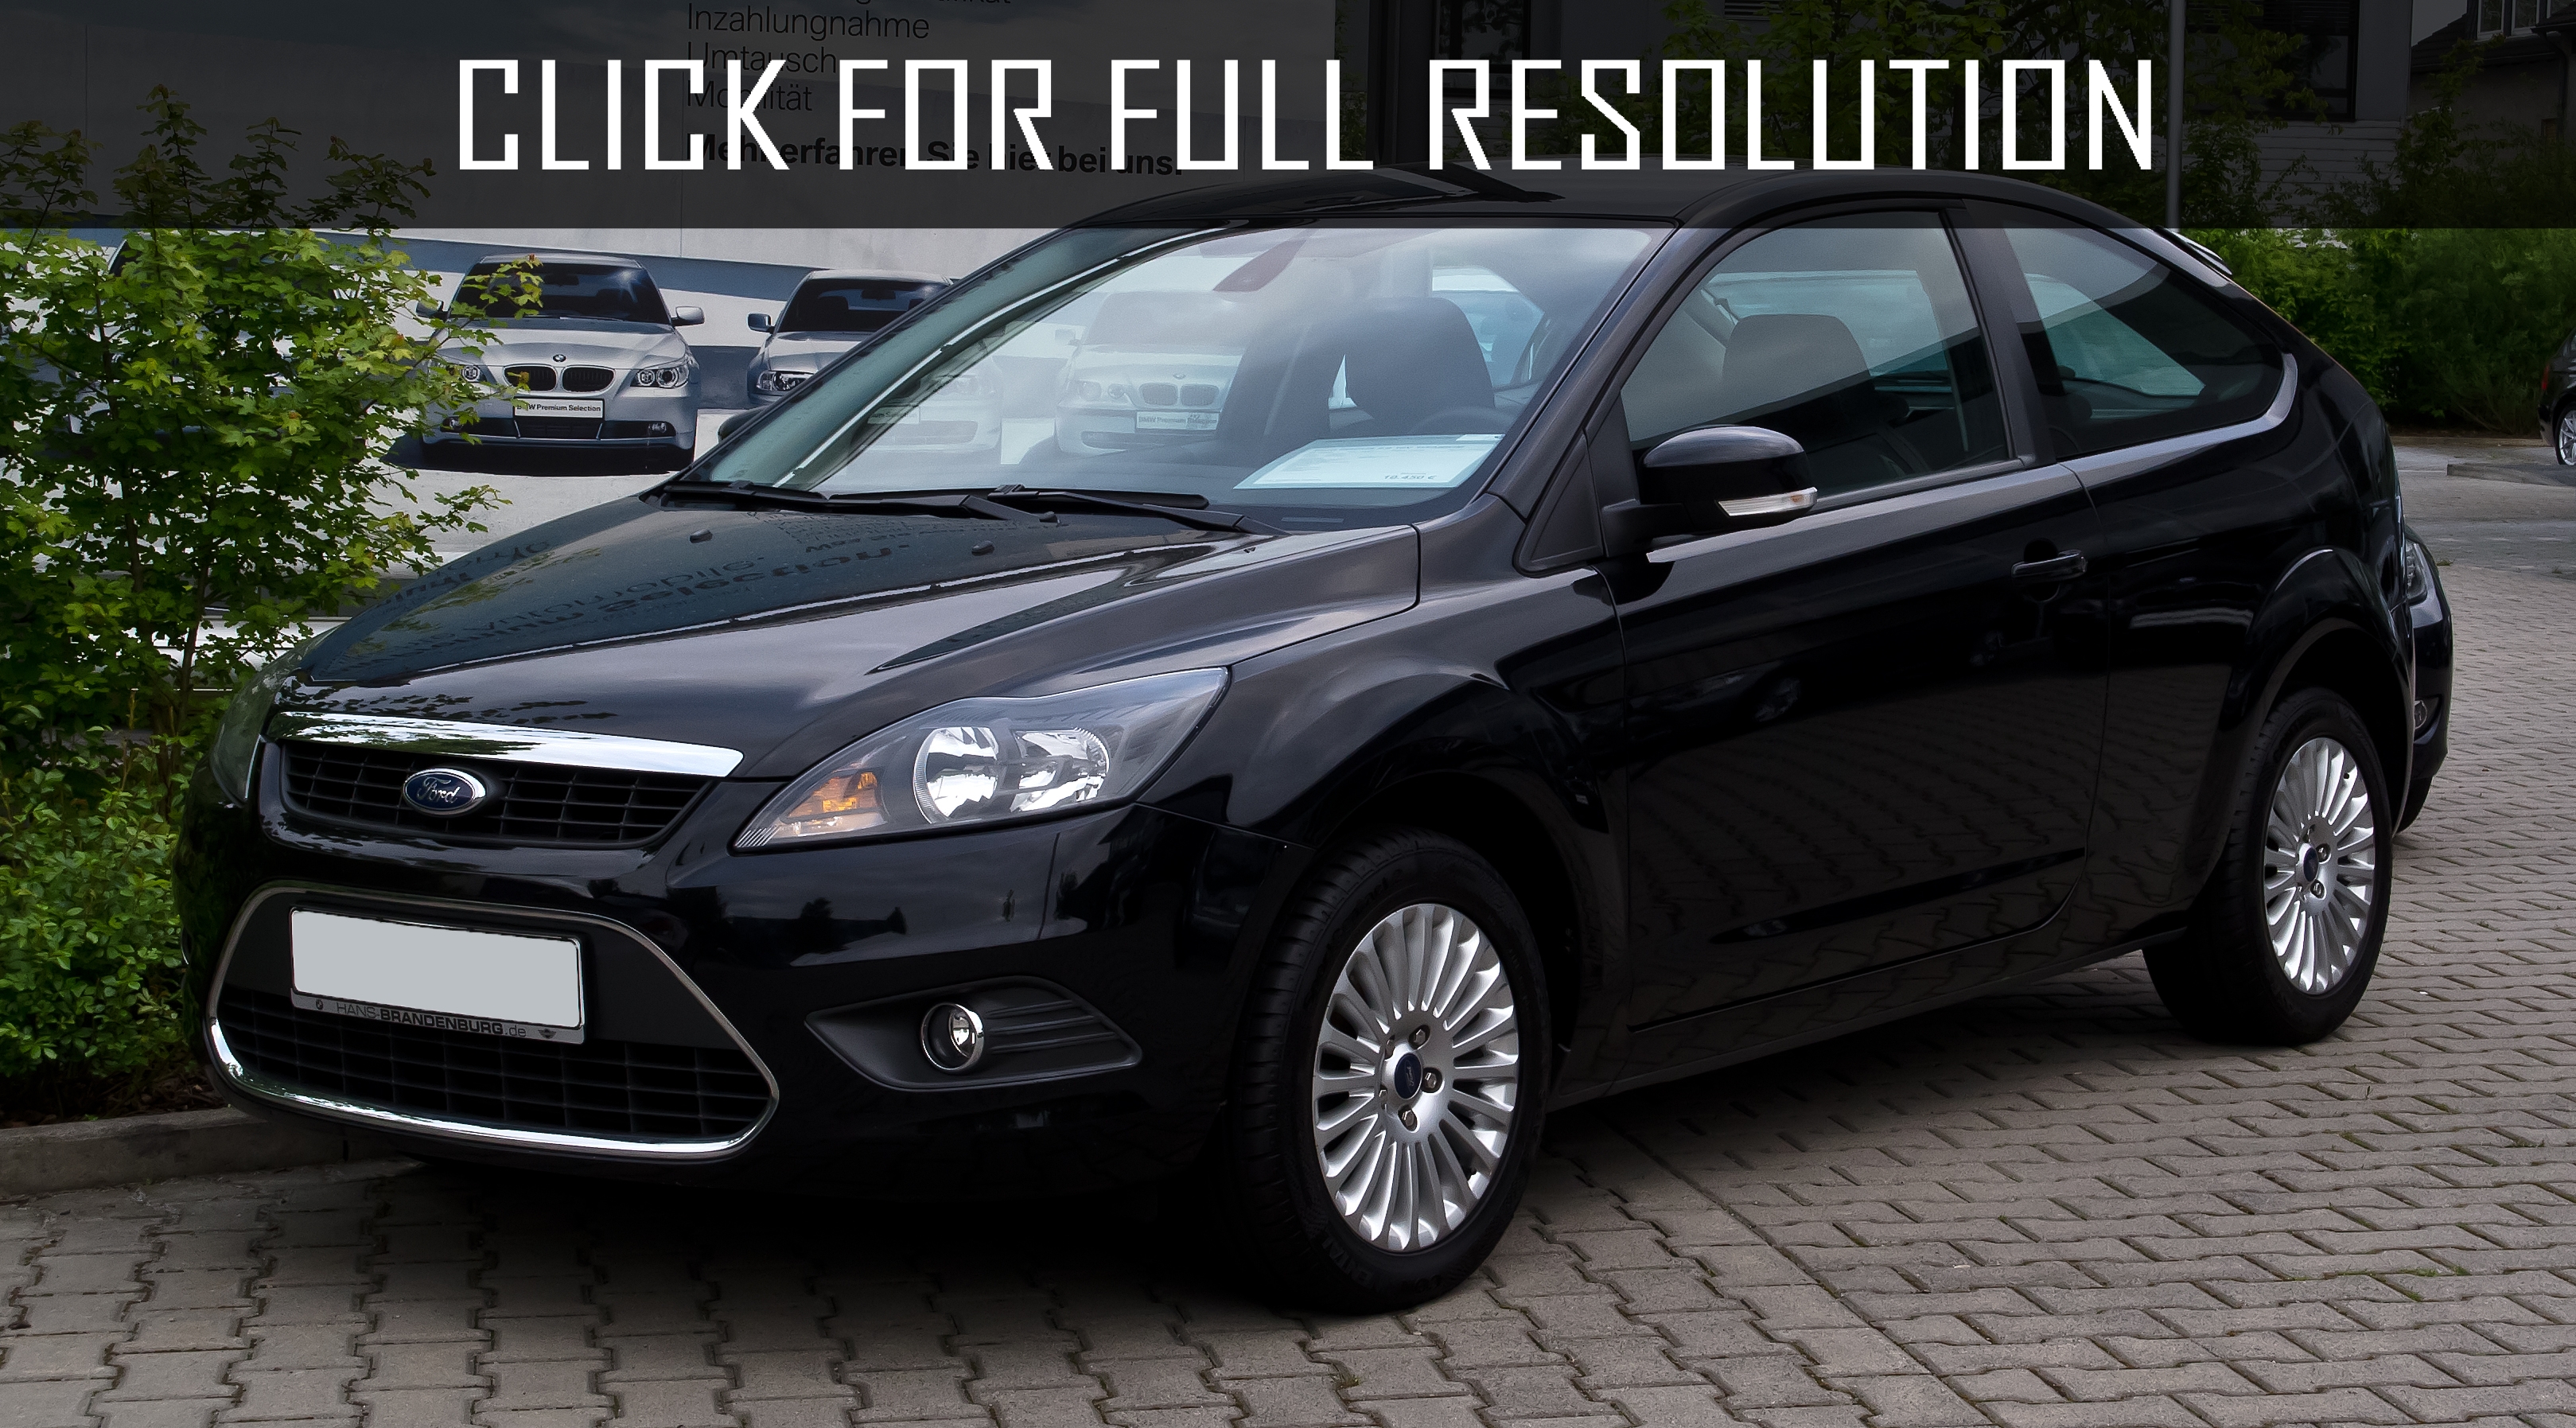 2010 Ford Focus - Photos All Recommendation